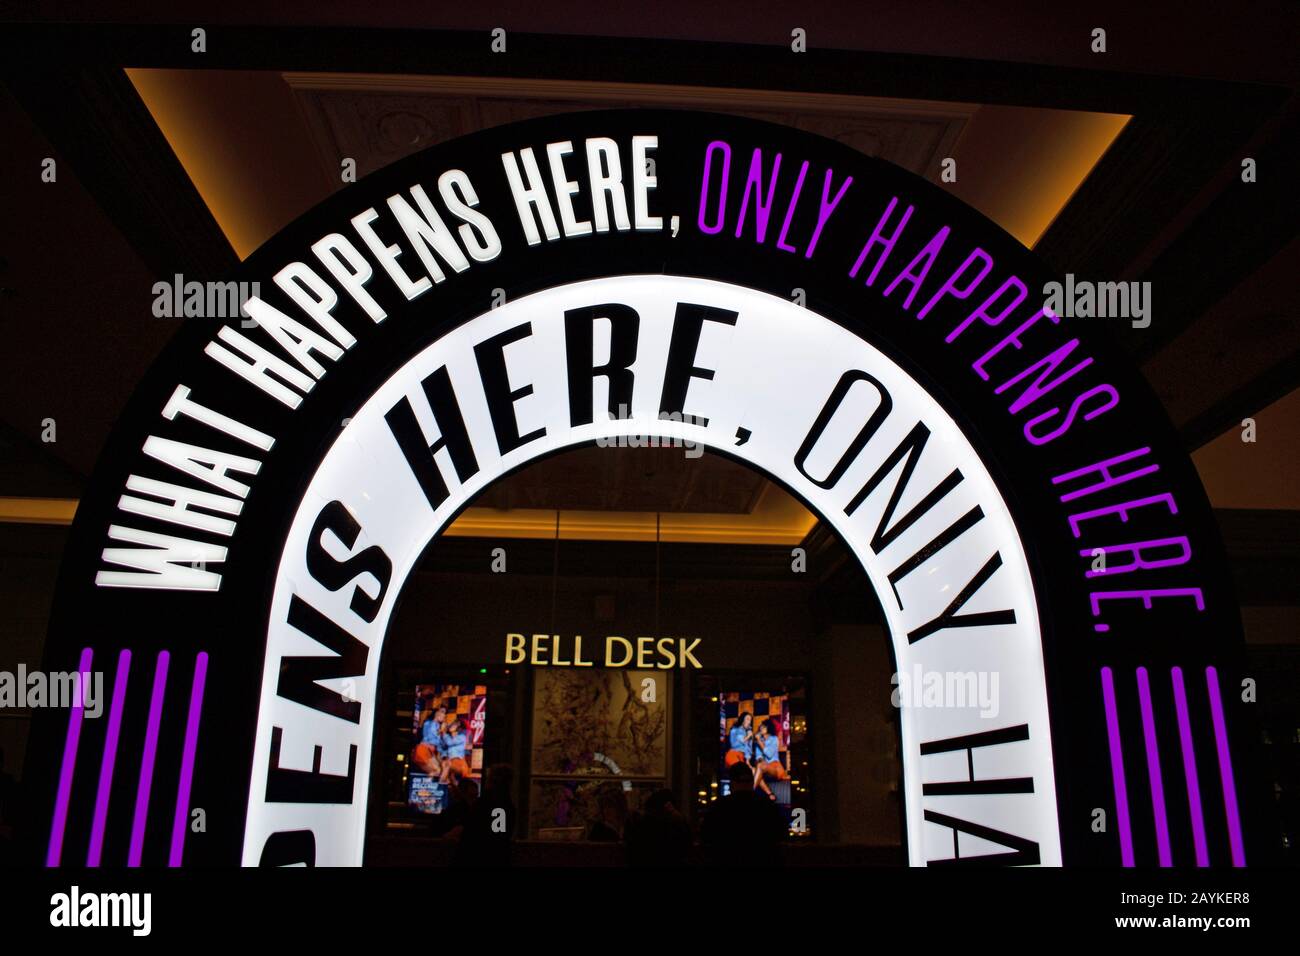 New Las Vegas Slogan, Motto, Theme: "What Happens Here, Only Happens Here,  a Lighted Display in Las Vegas, Nevada Stock Photo - Alamy